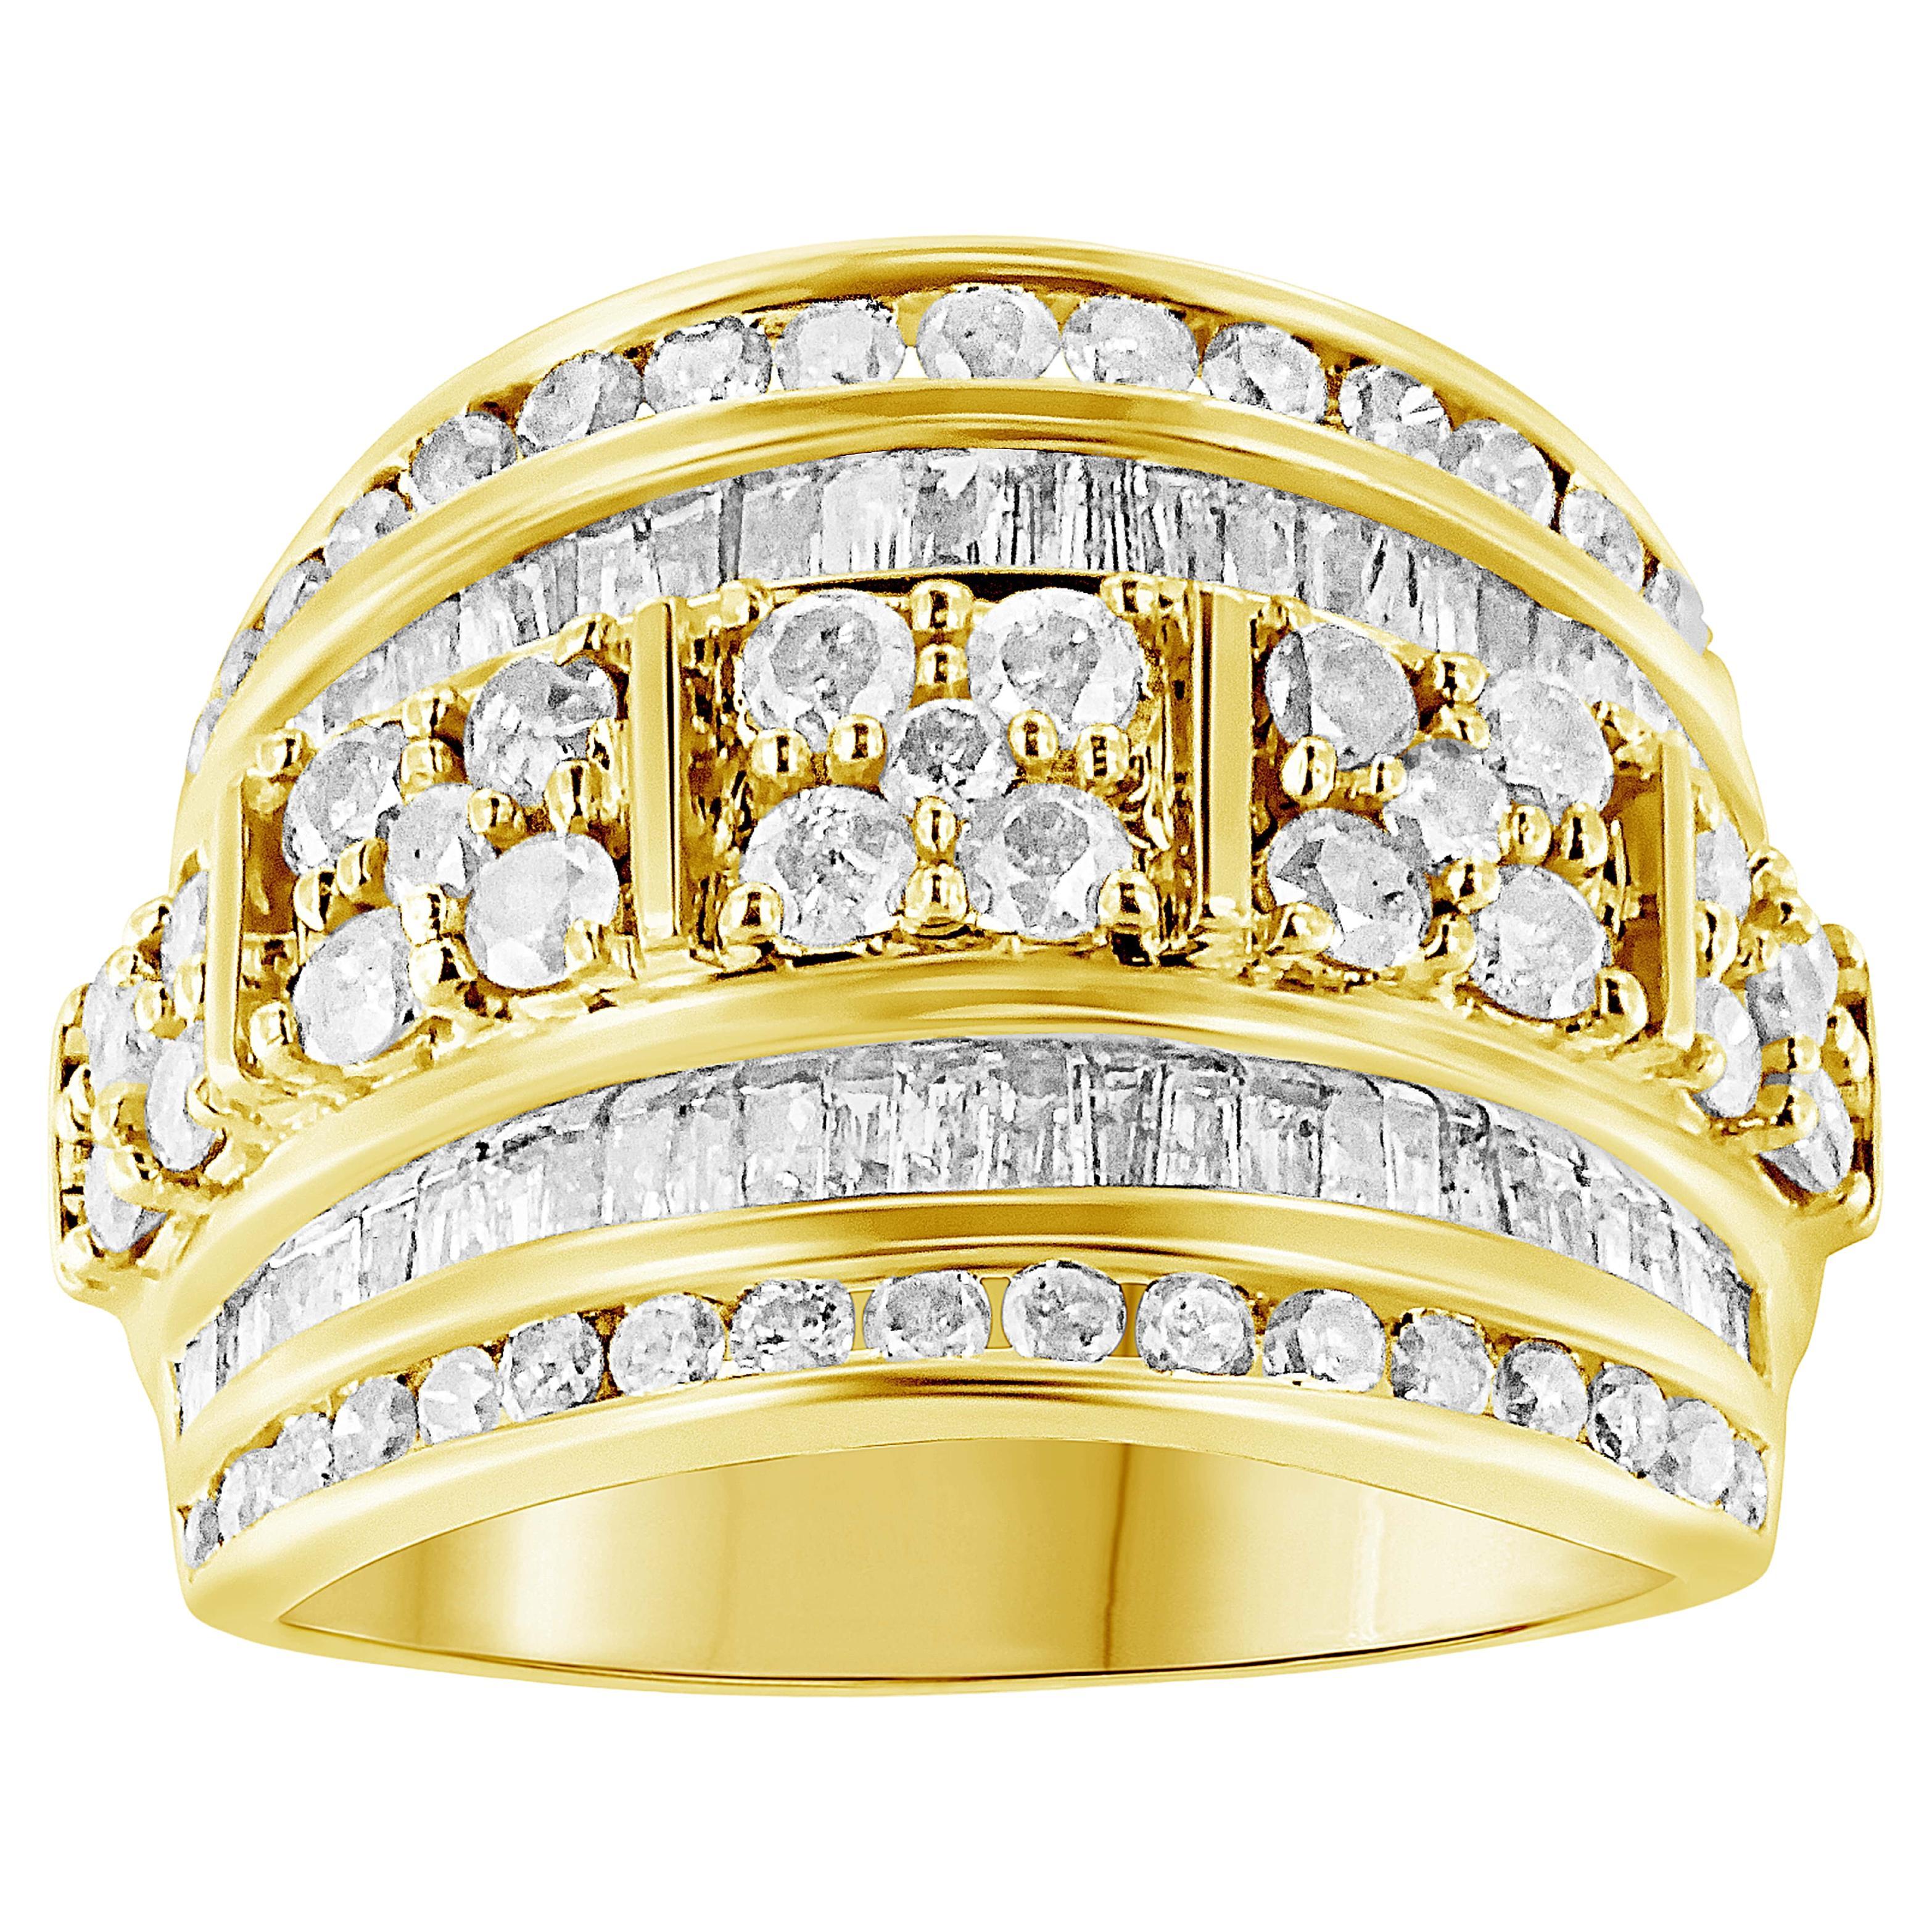 For Sale:  10k Yellow Gold over Sterling Silver 2.0 Carat Diamond Cocktail Fashion Ring